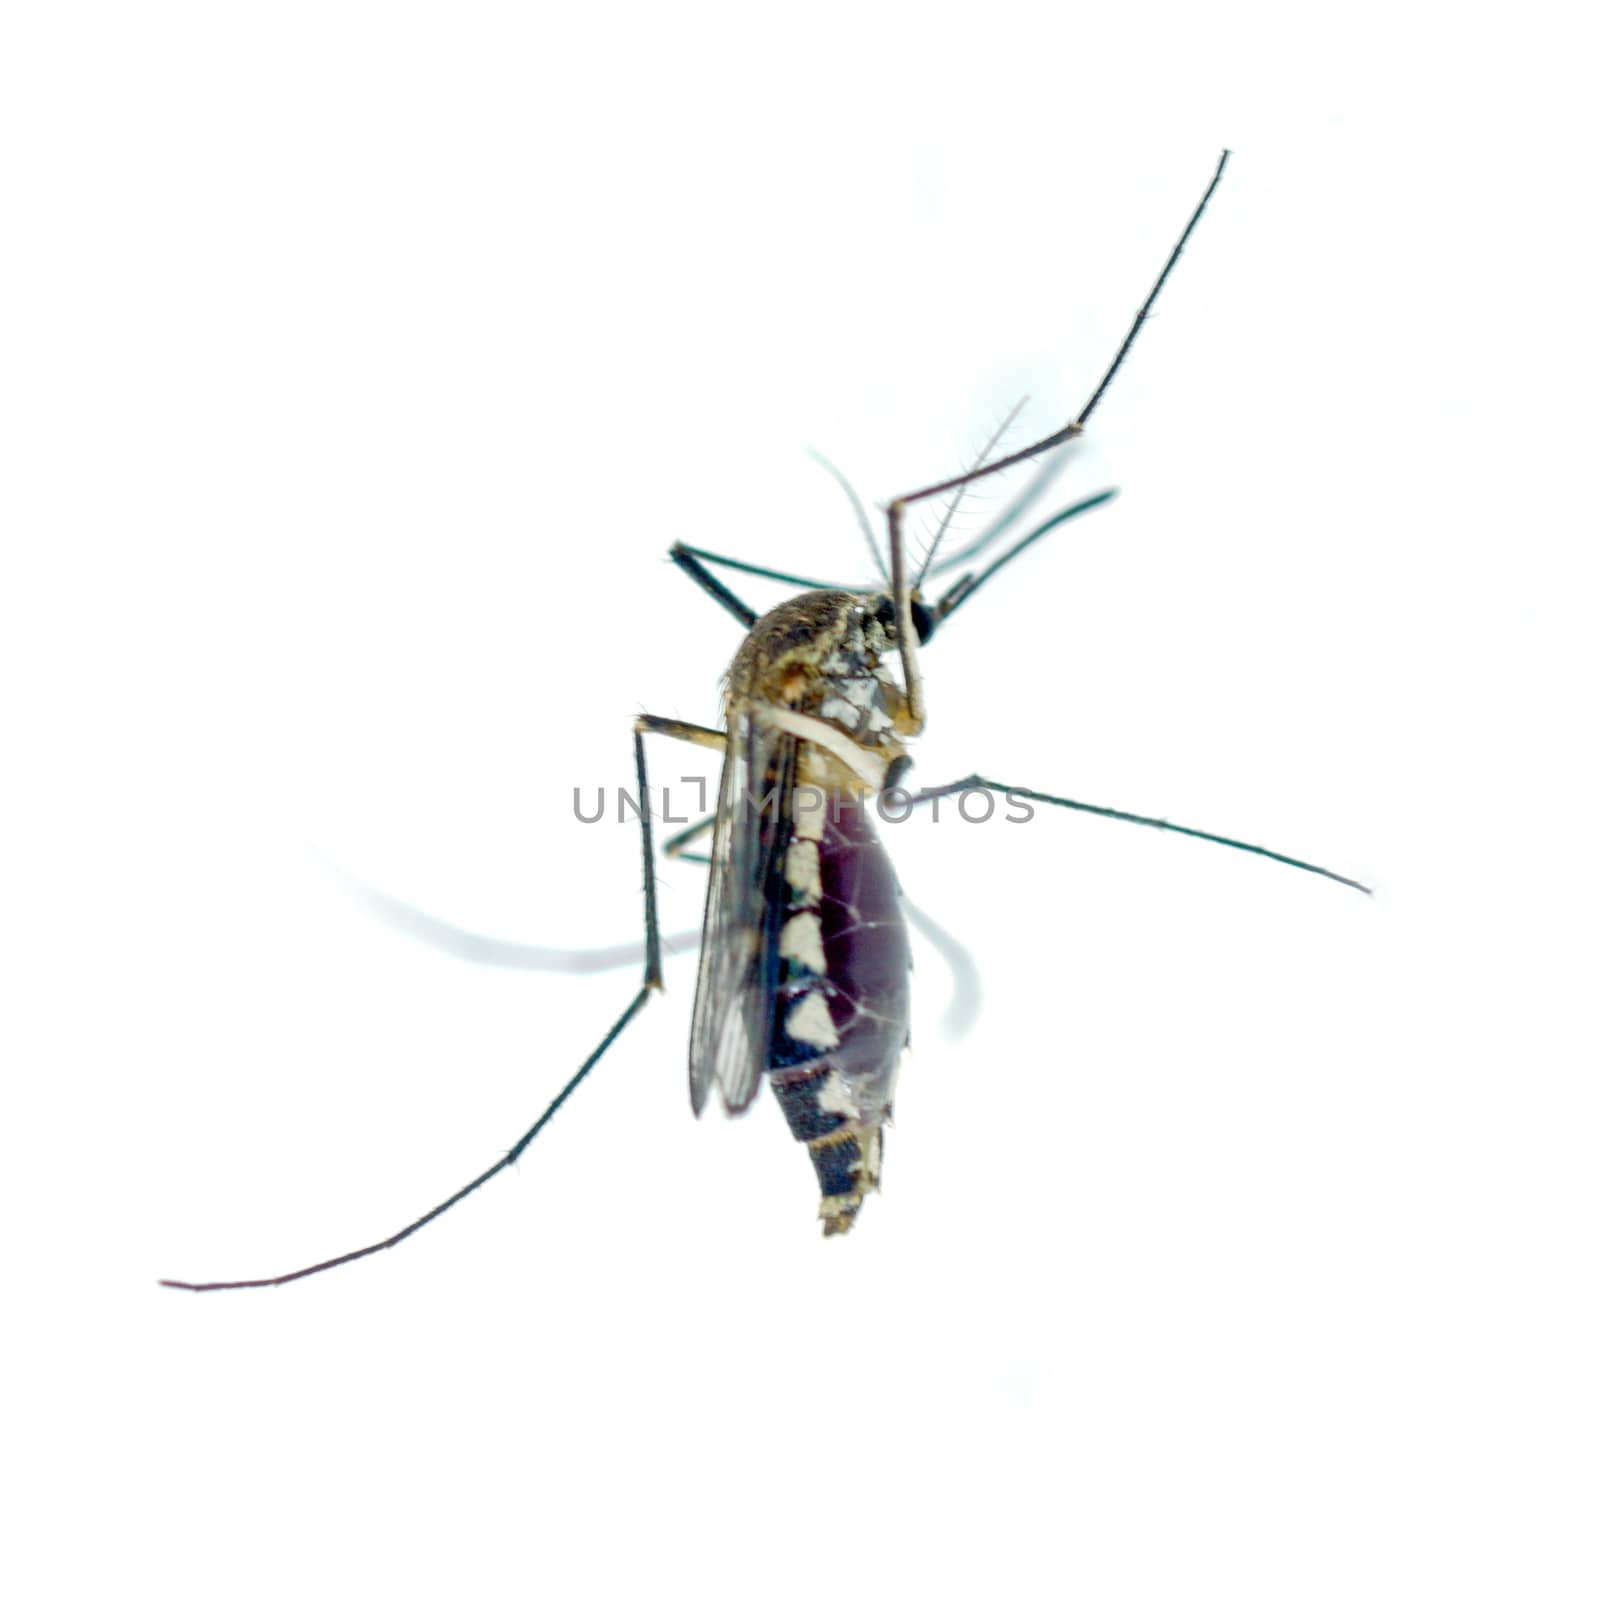 Mosquito isolated on white background by Noppharat_th